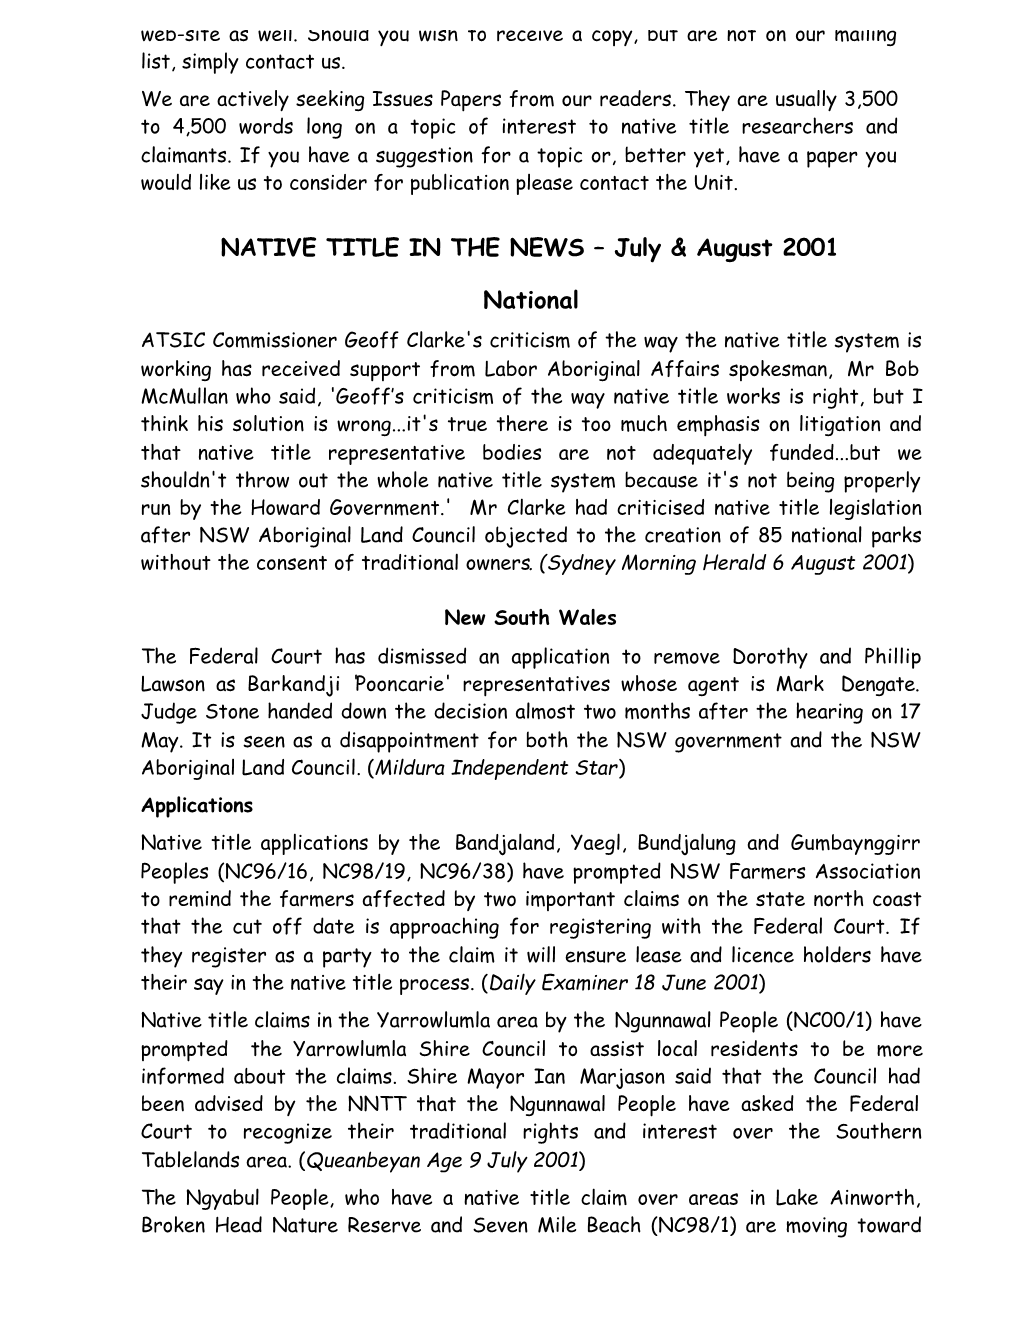 NATIVE TITLE in the NEWS – July & August 2001 National